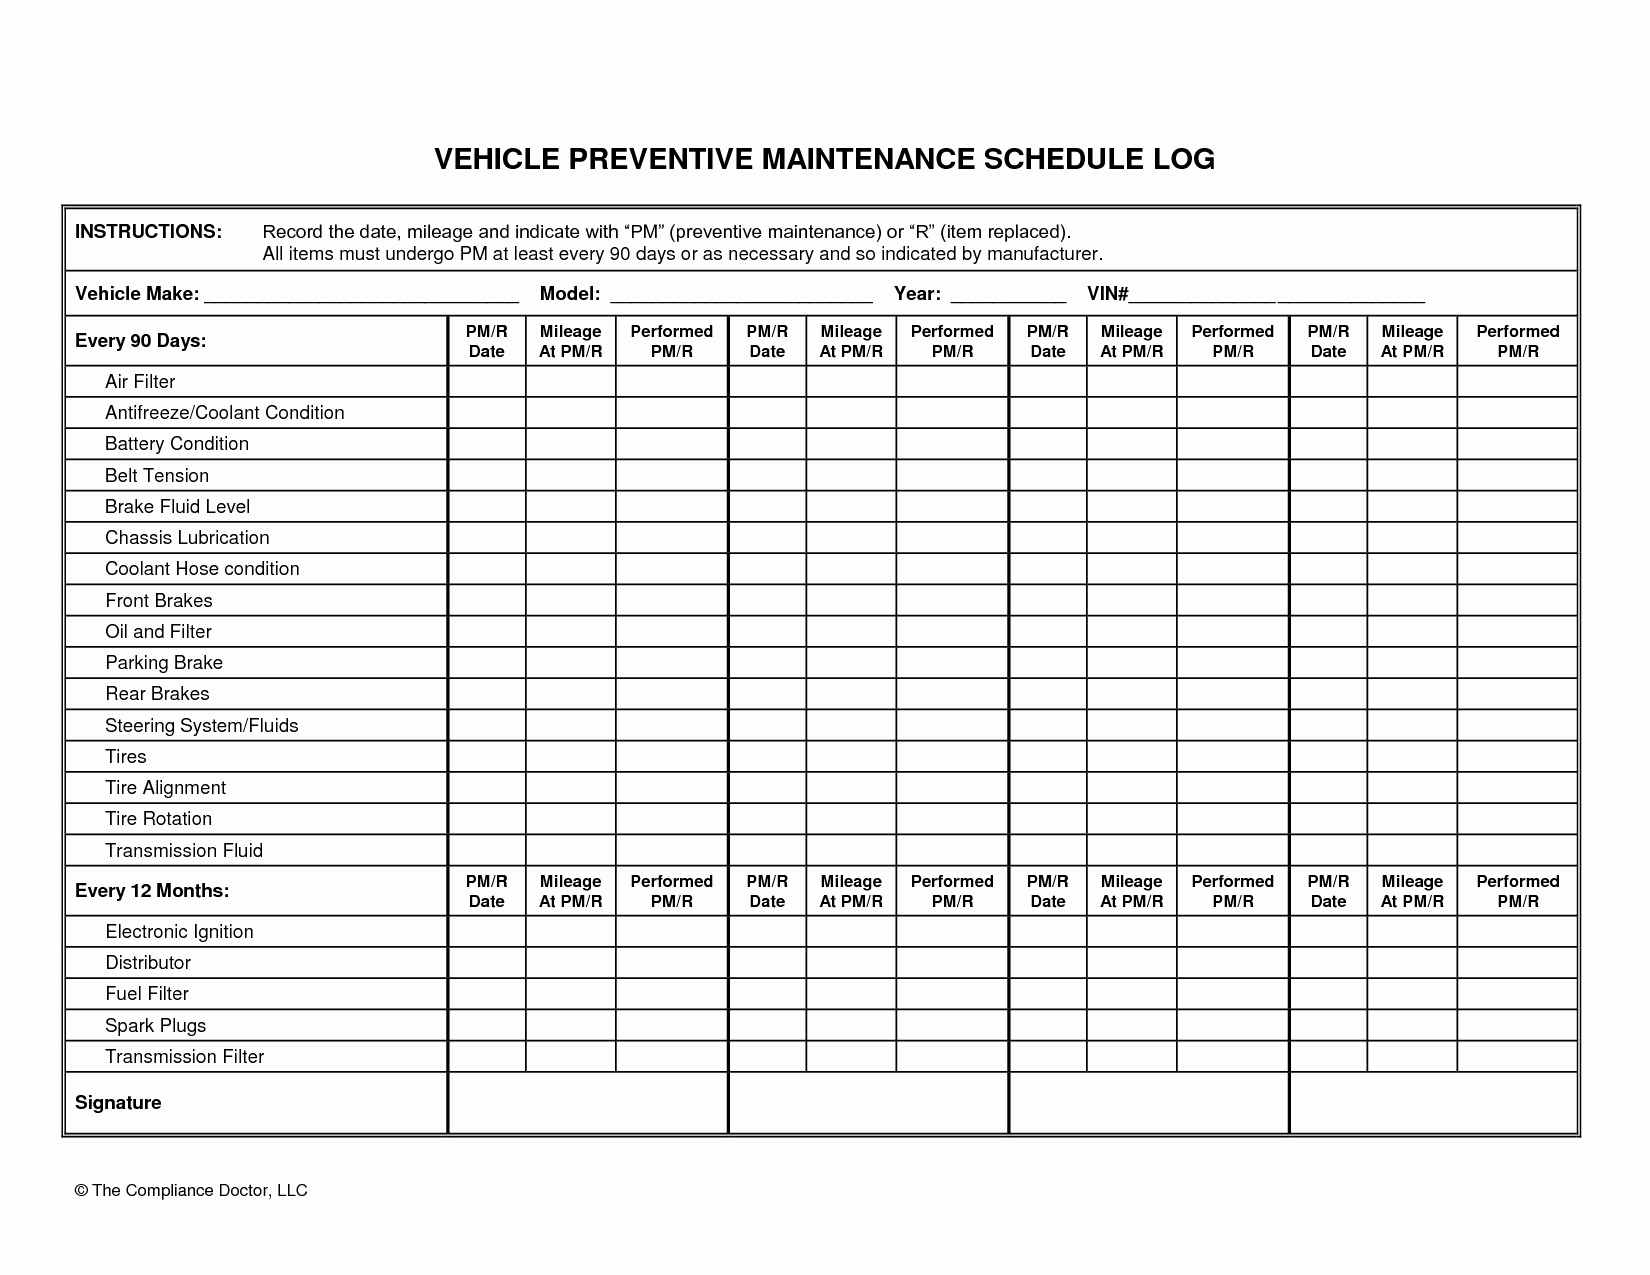 Car Maintenance Schedule Spreadsheet On How To Make An Excel With Preventive Maintenance Spreadsheet